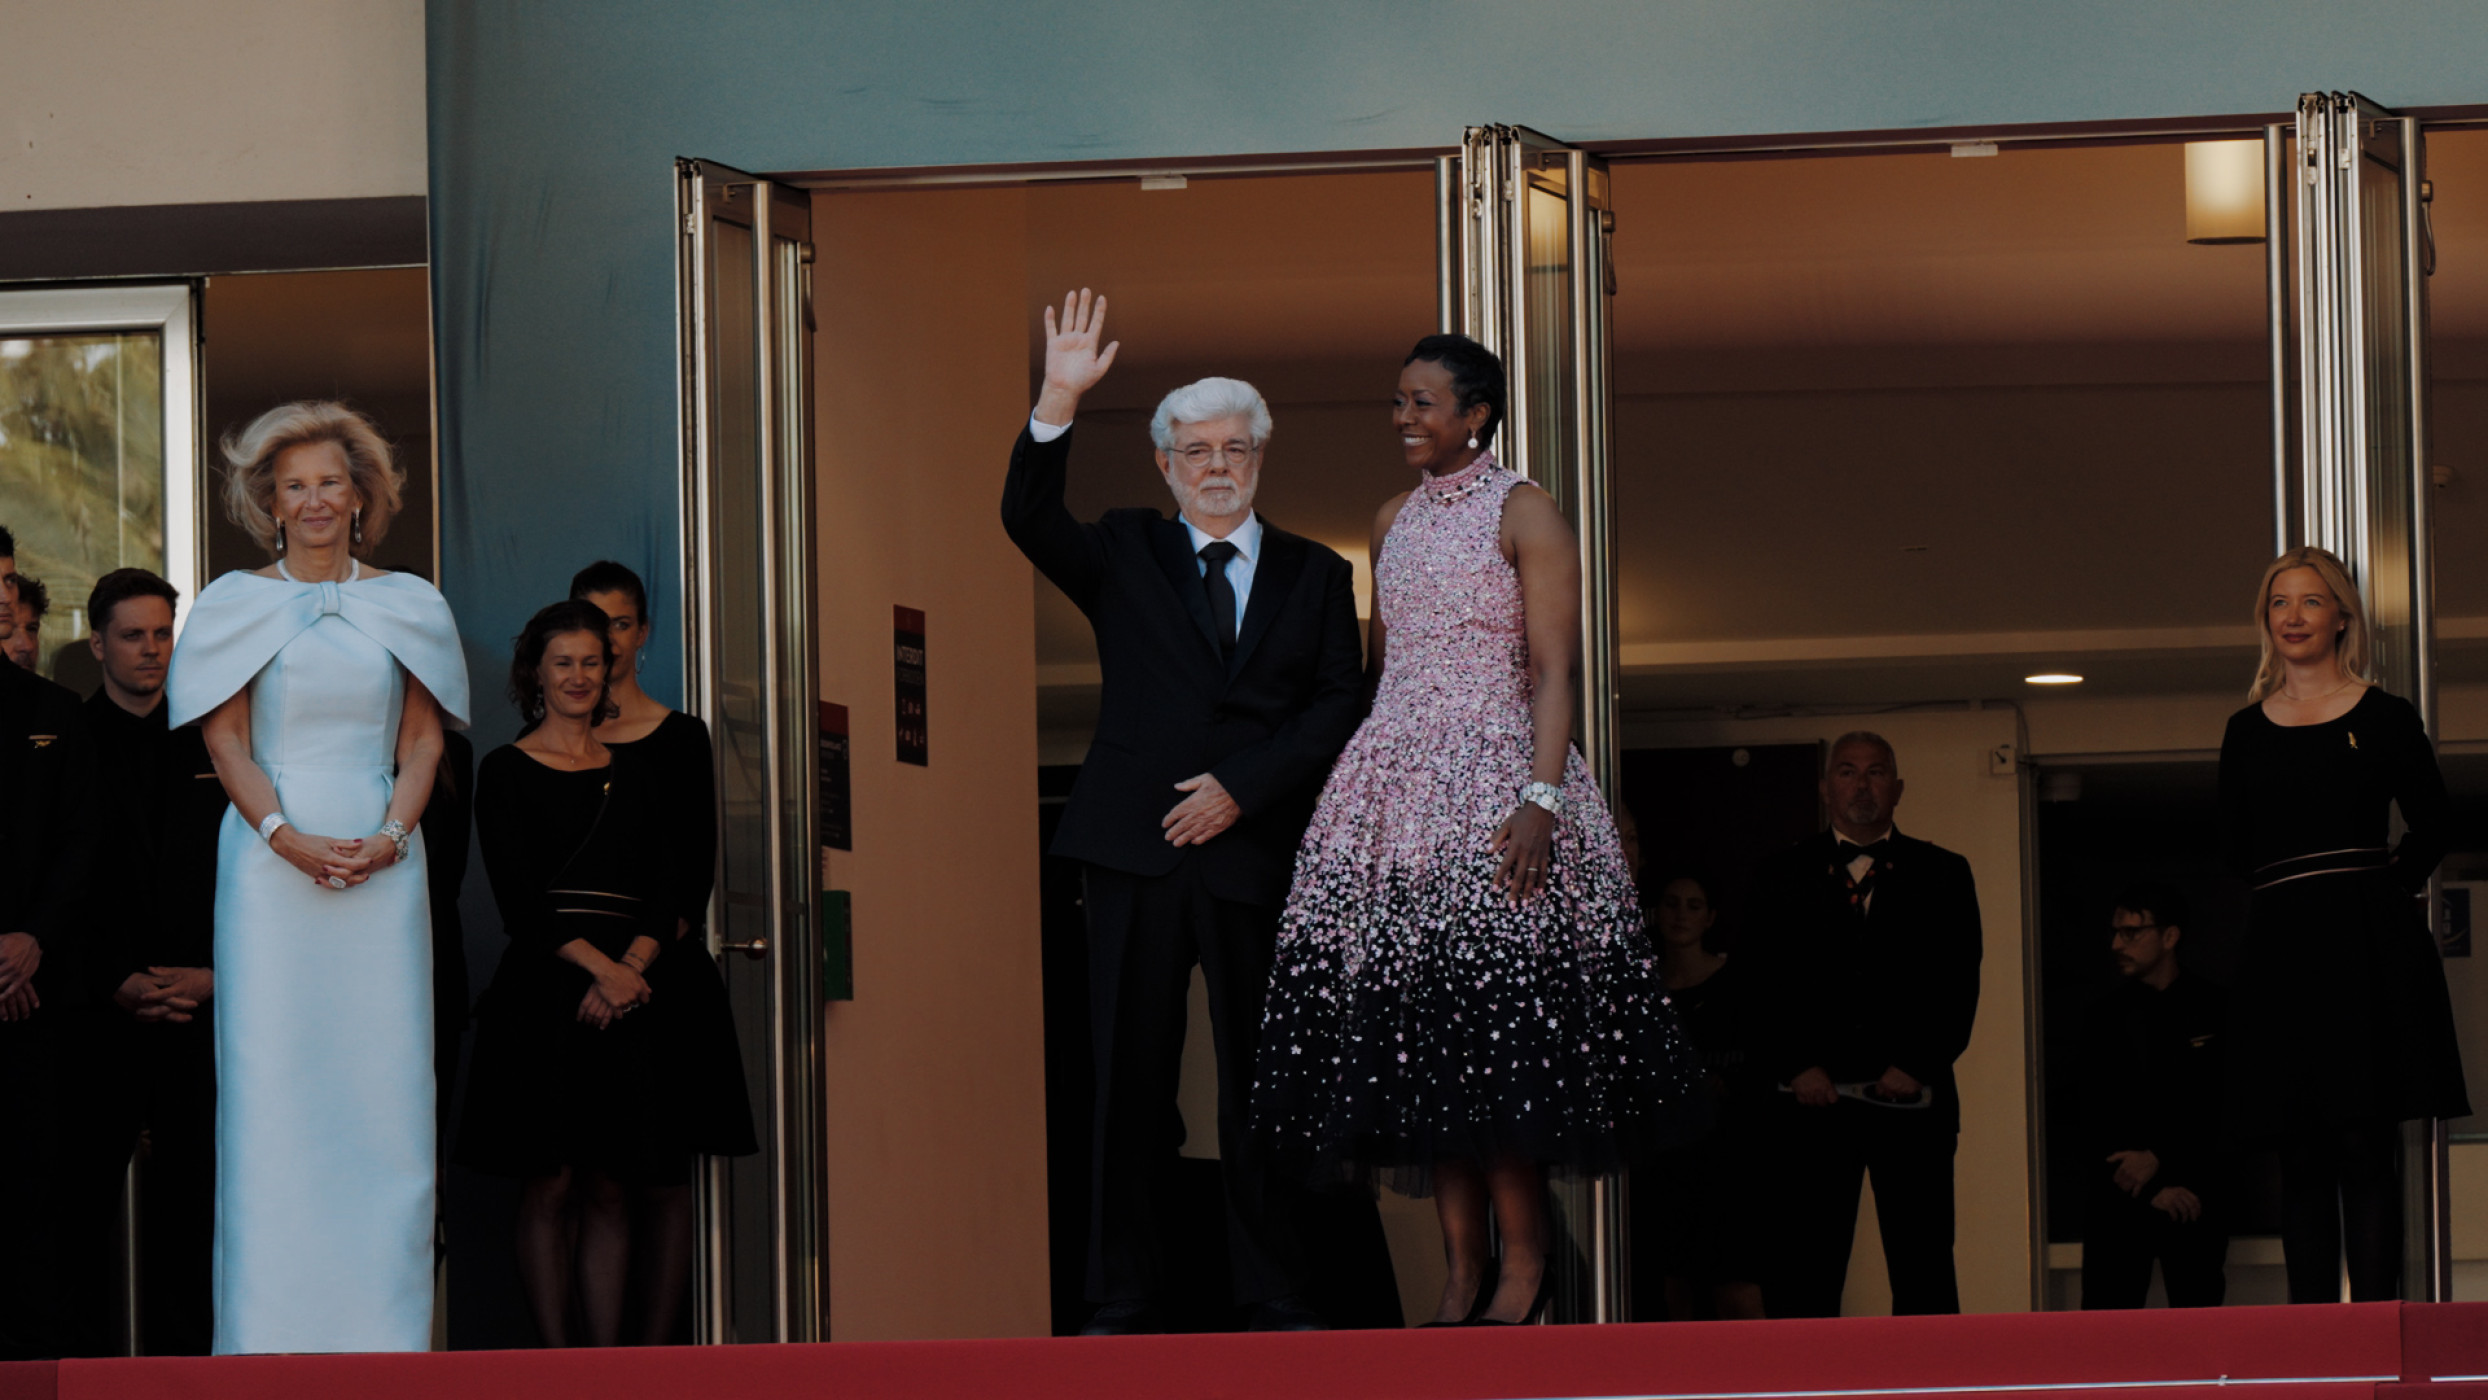 George Lucas And Mellody Hobson